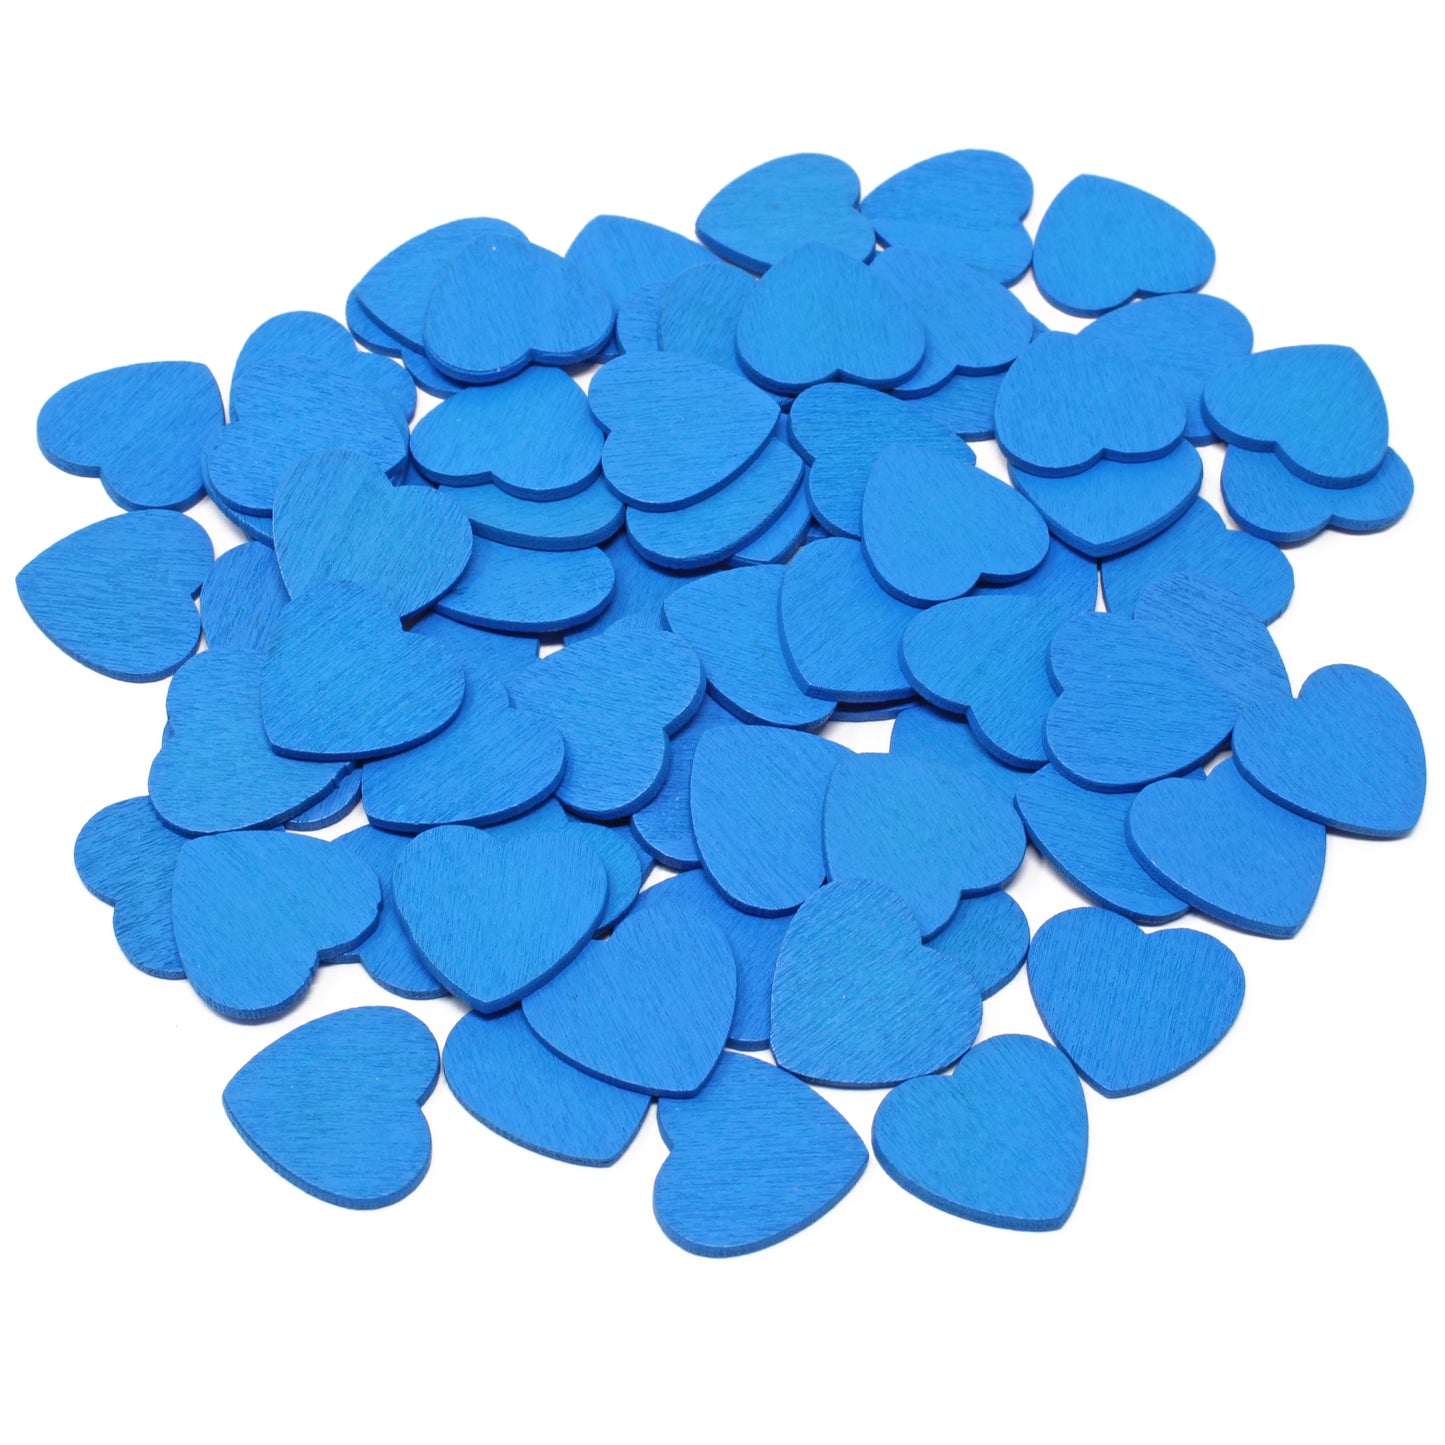 Blue 18mm Wooden Craft Coloured Hearts